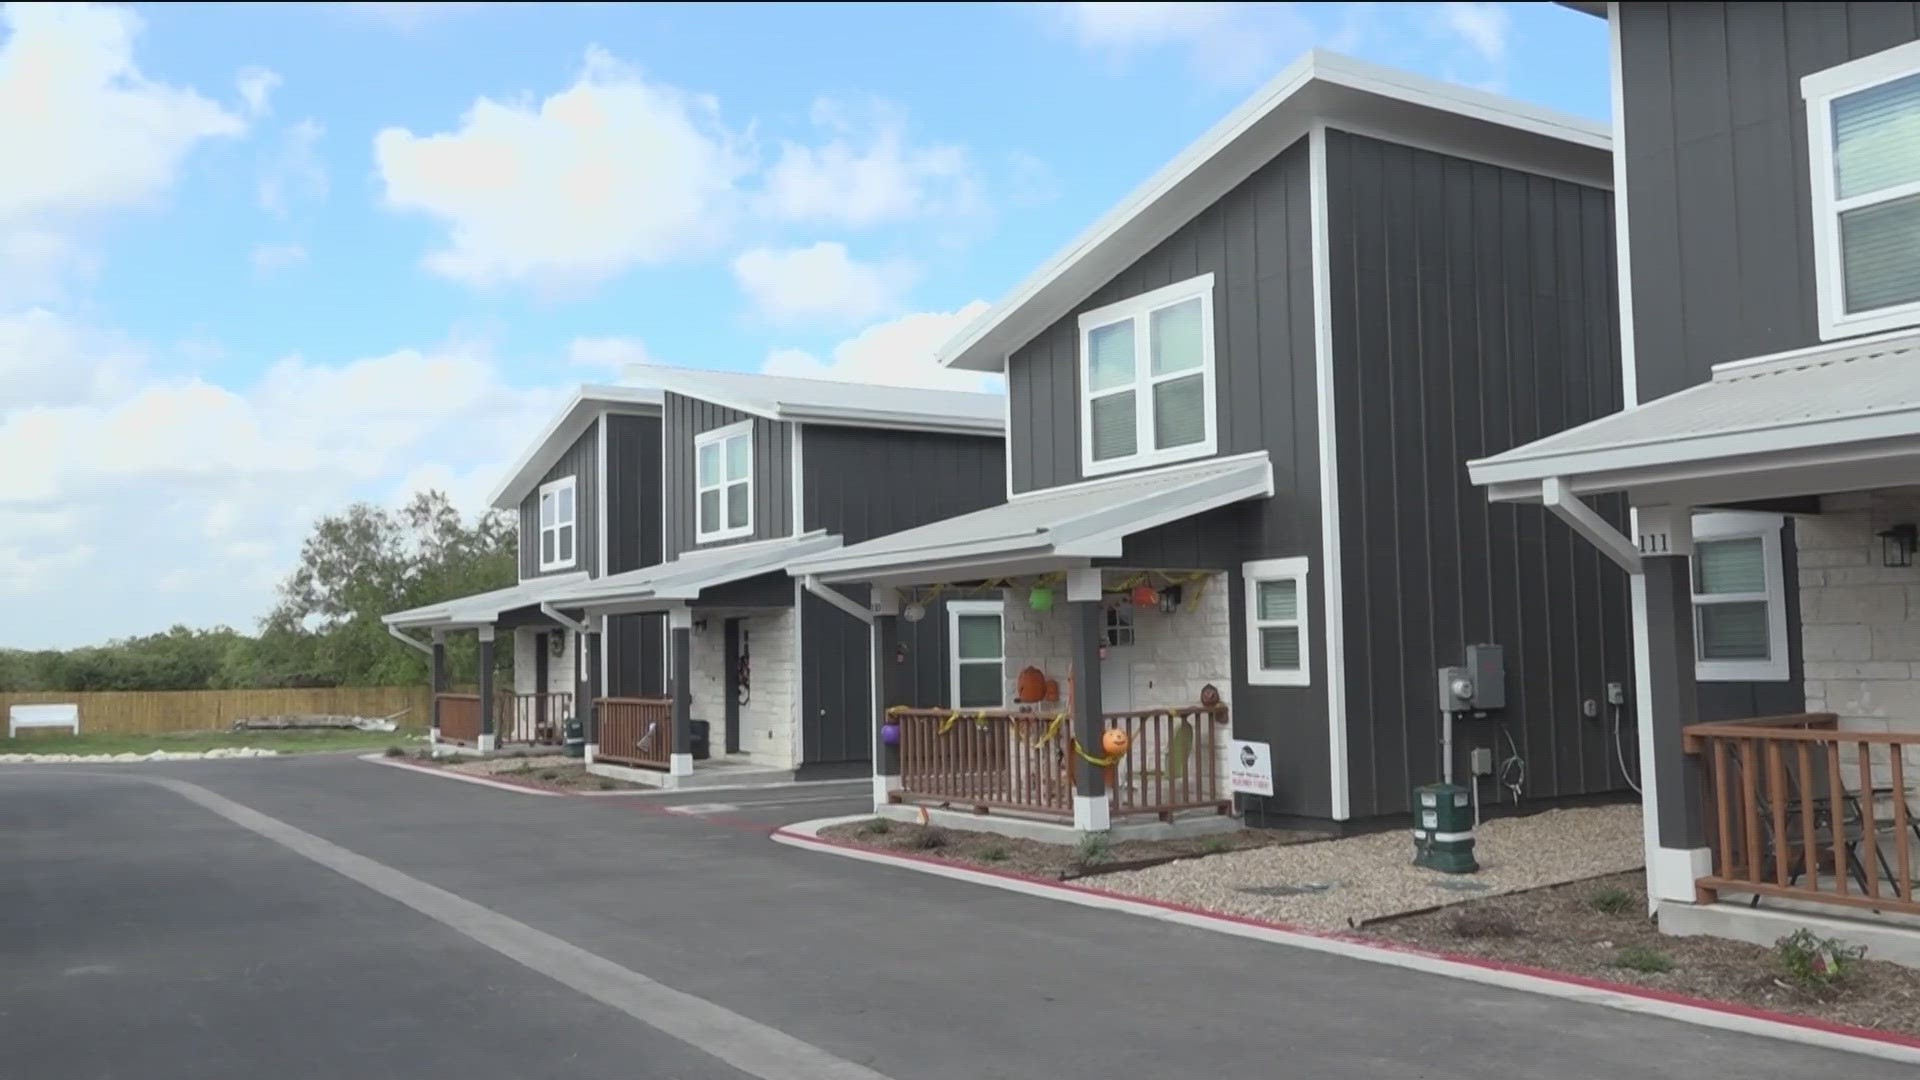 KVUE's Eric Pointer explains how one Round Rock community is making a big impact with very small spaces.